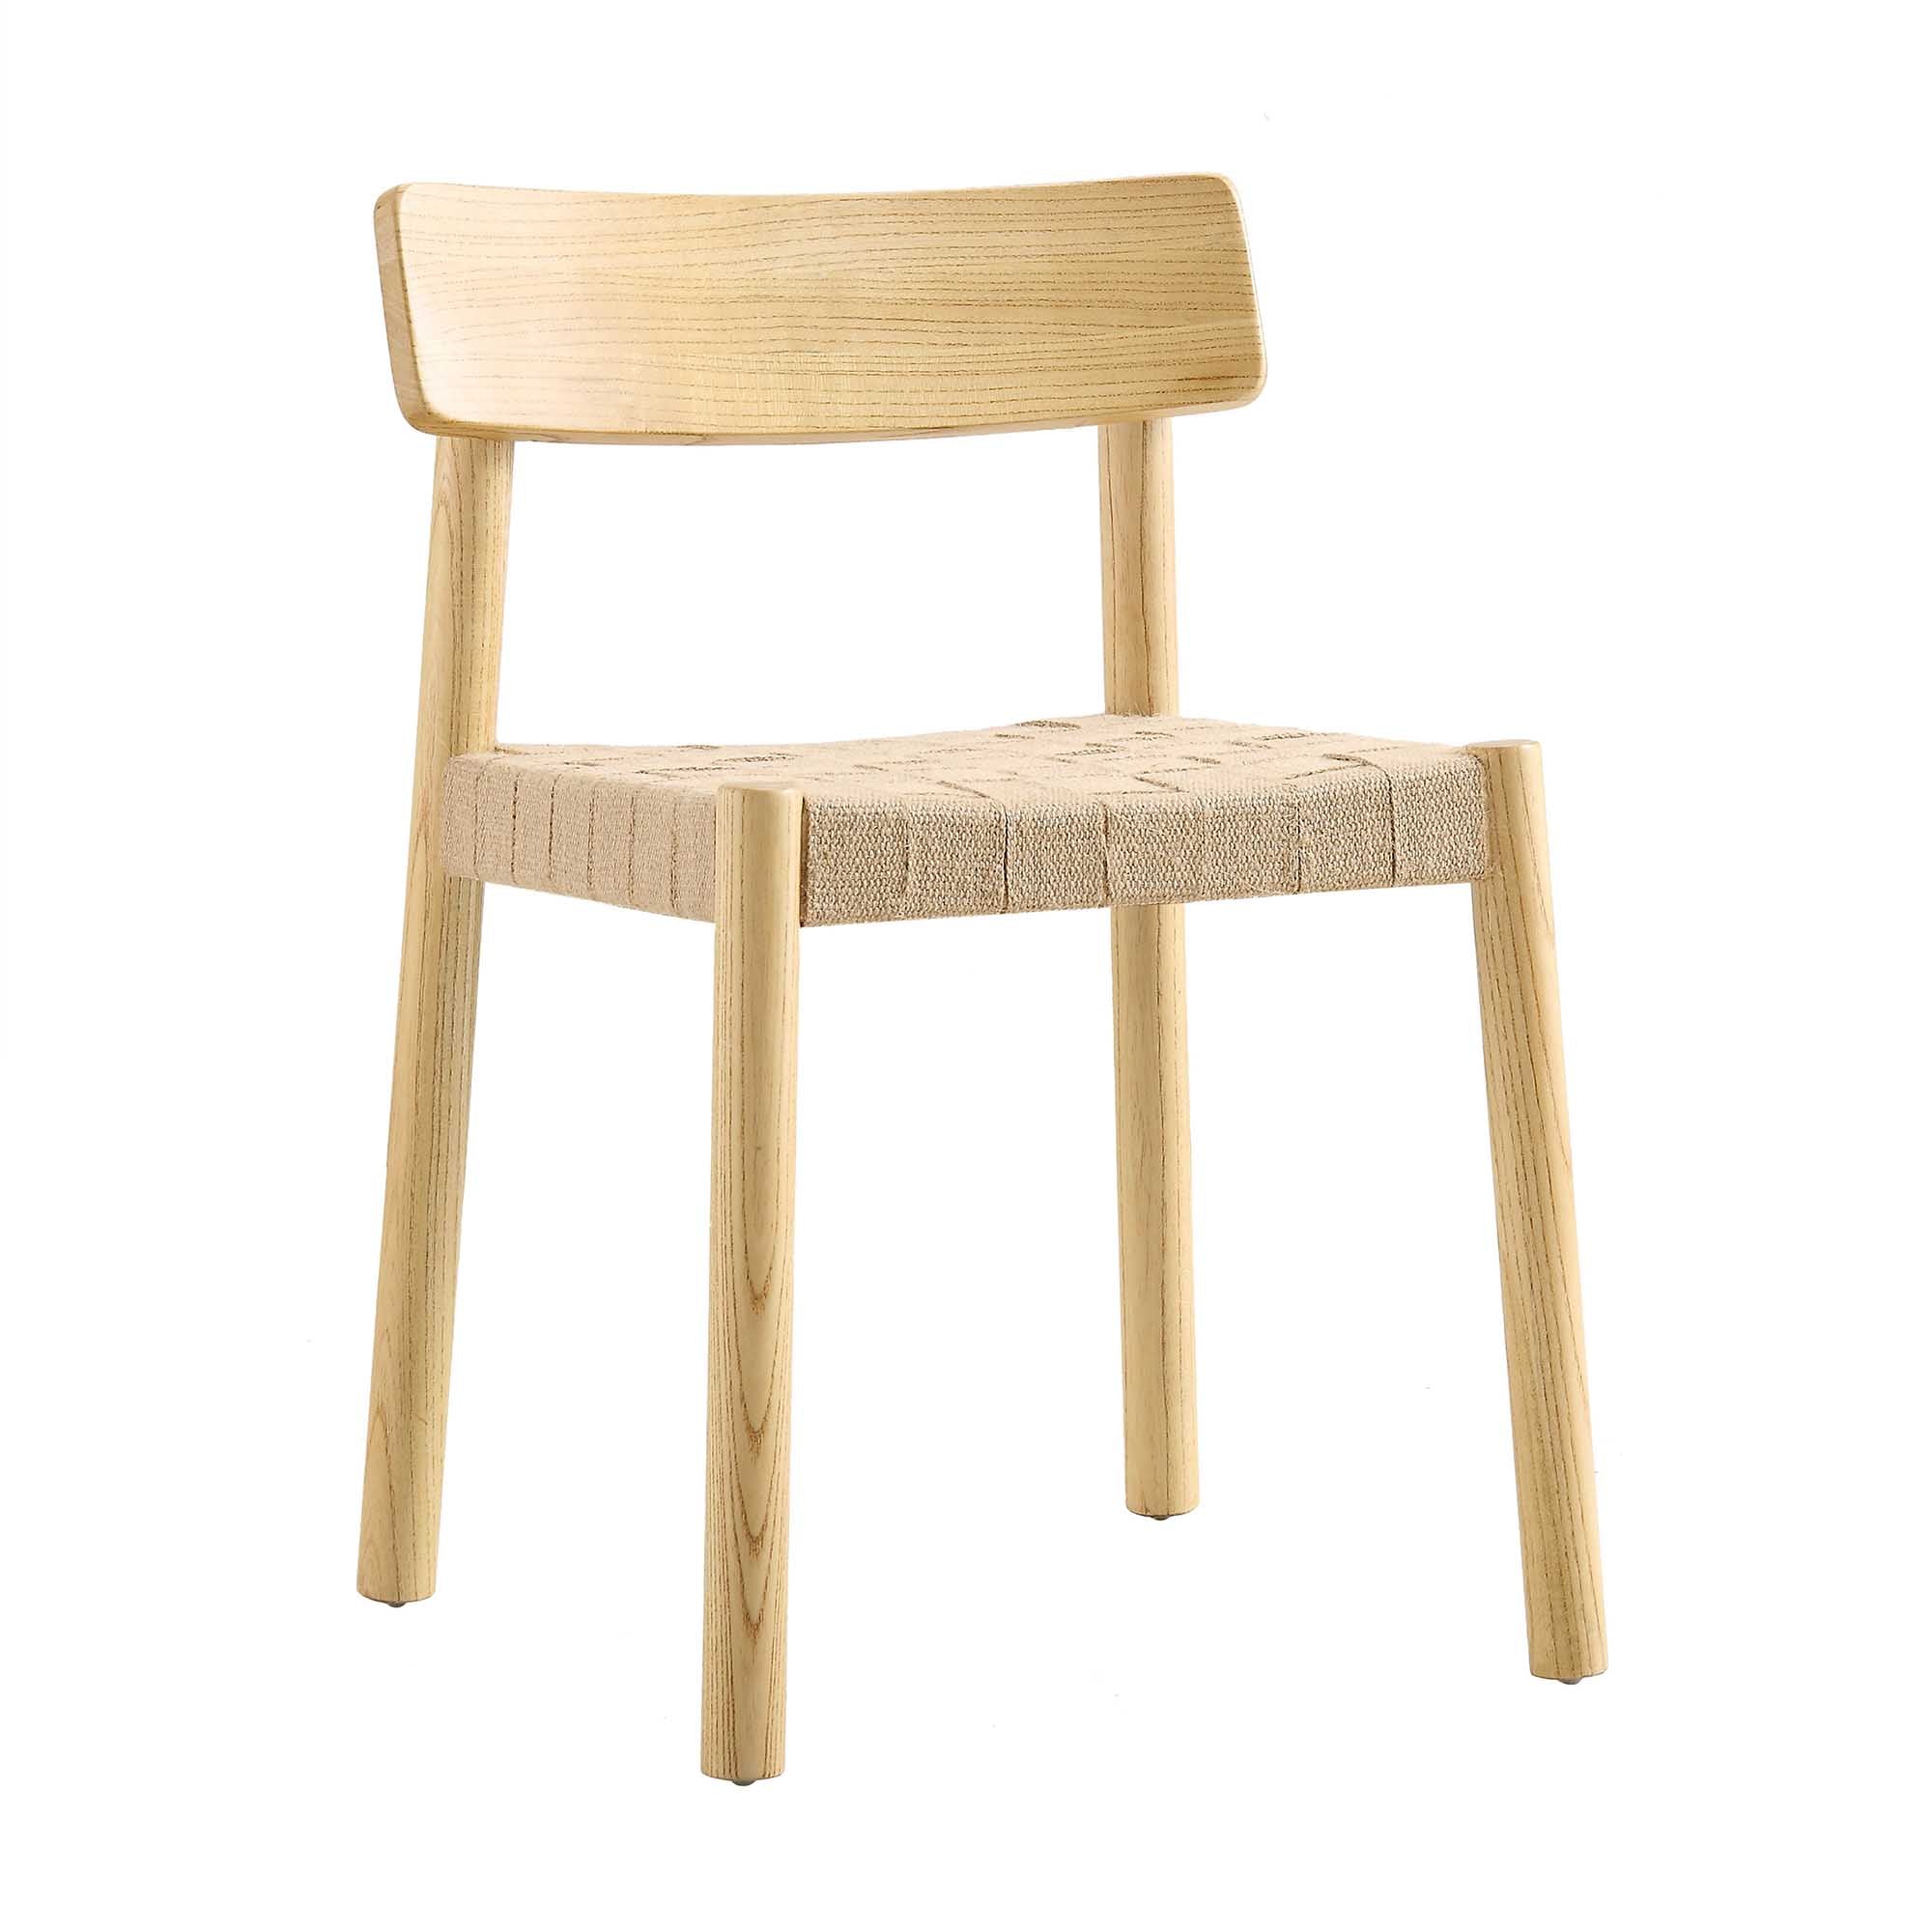 Ditton Set of 2 Elm Wood and Jute Dining Chairs, Natural